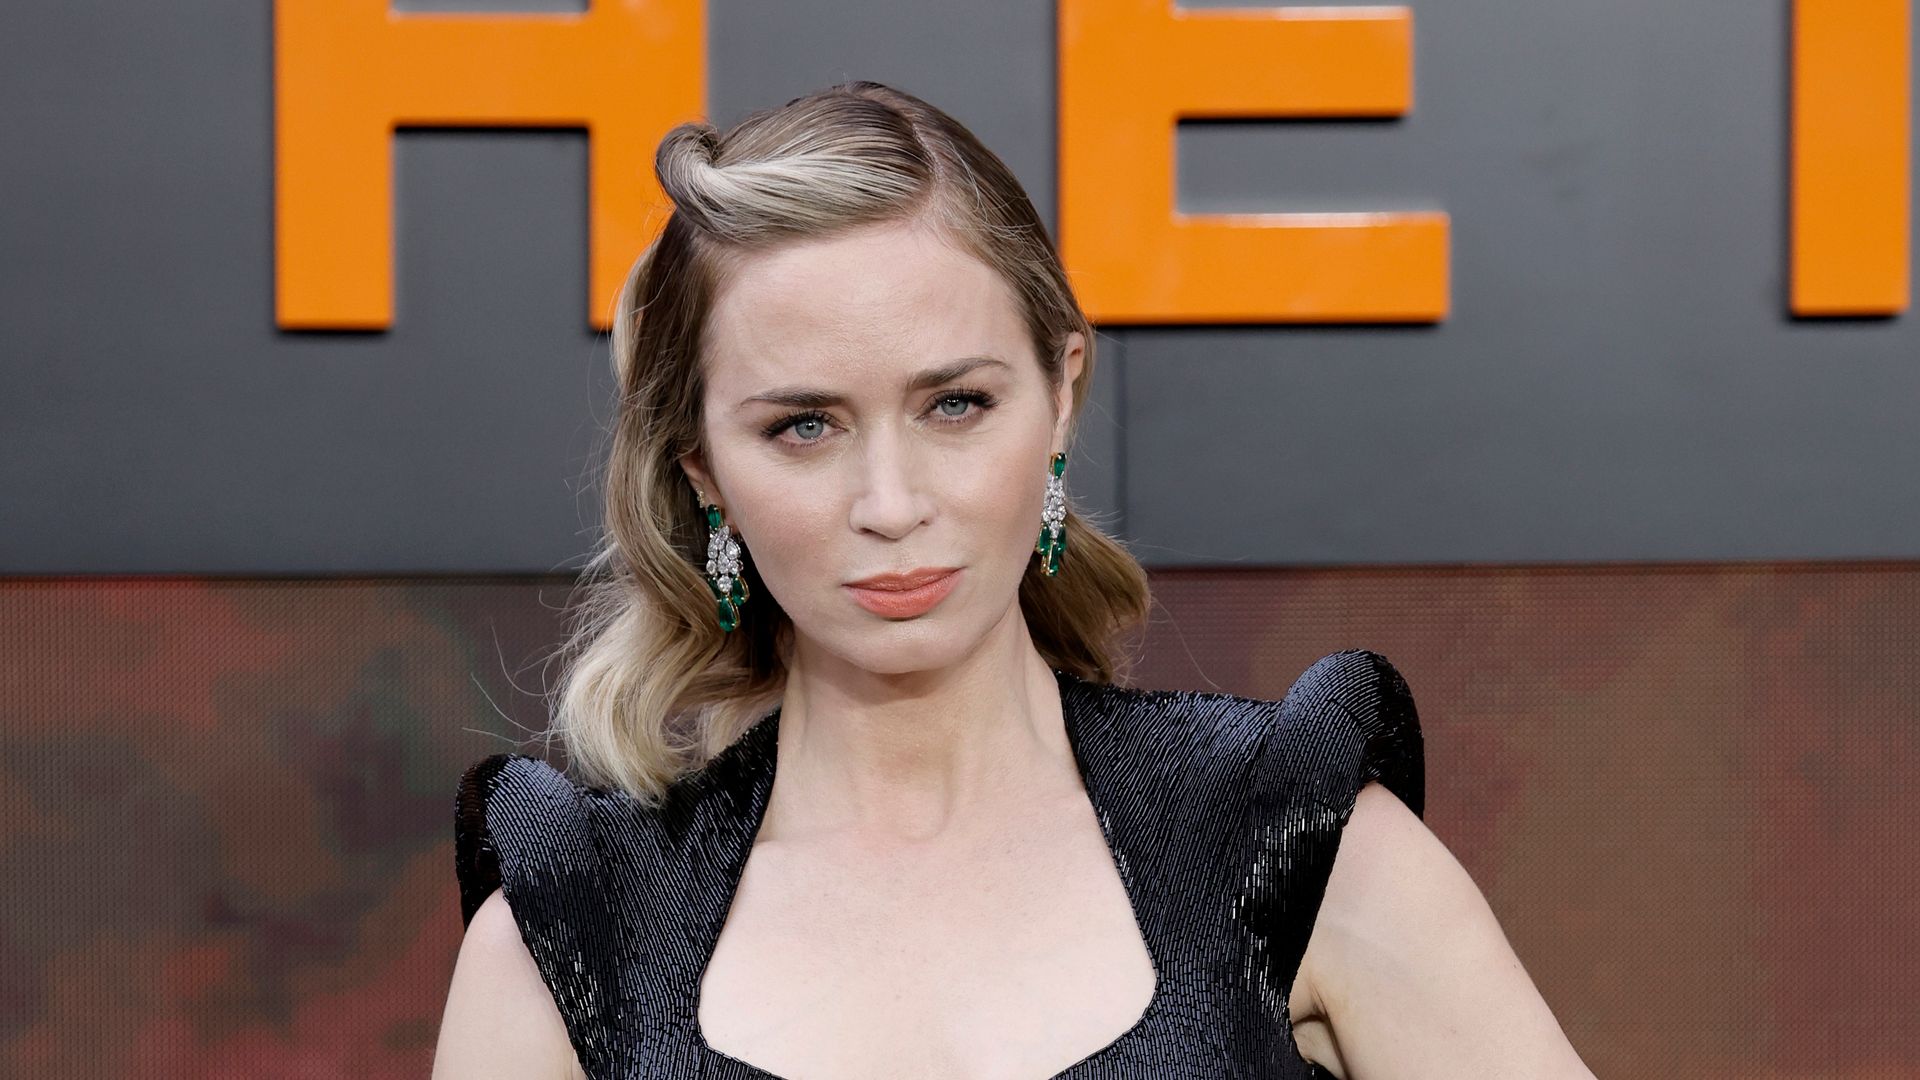 Emily Blunt attends the "Oppenheimer" UK Premiere at the Odeon Luxe Leicester Square on July 13, 2023 in London, England